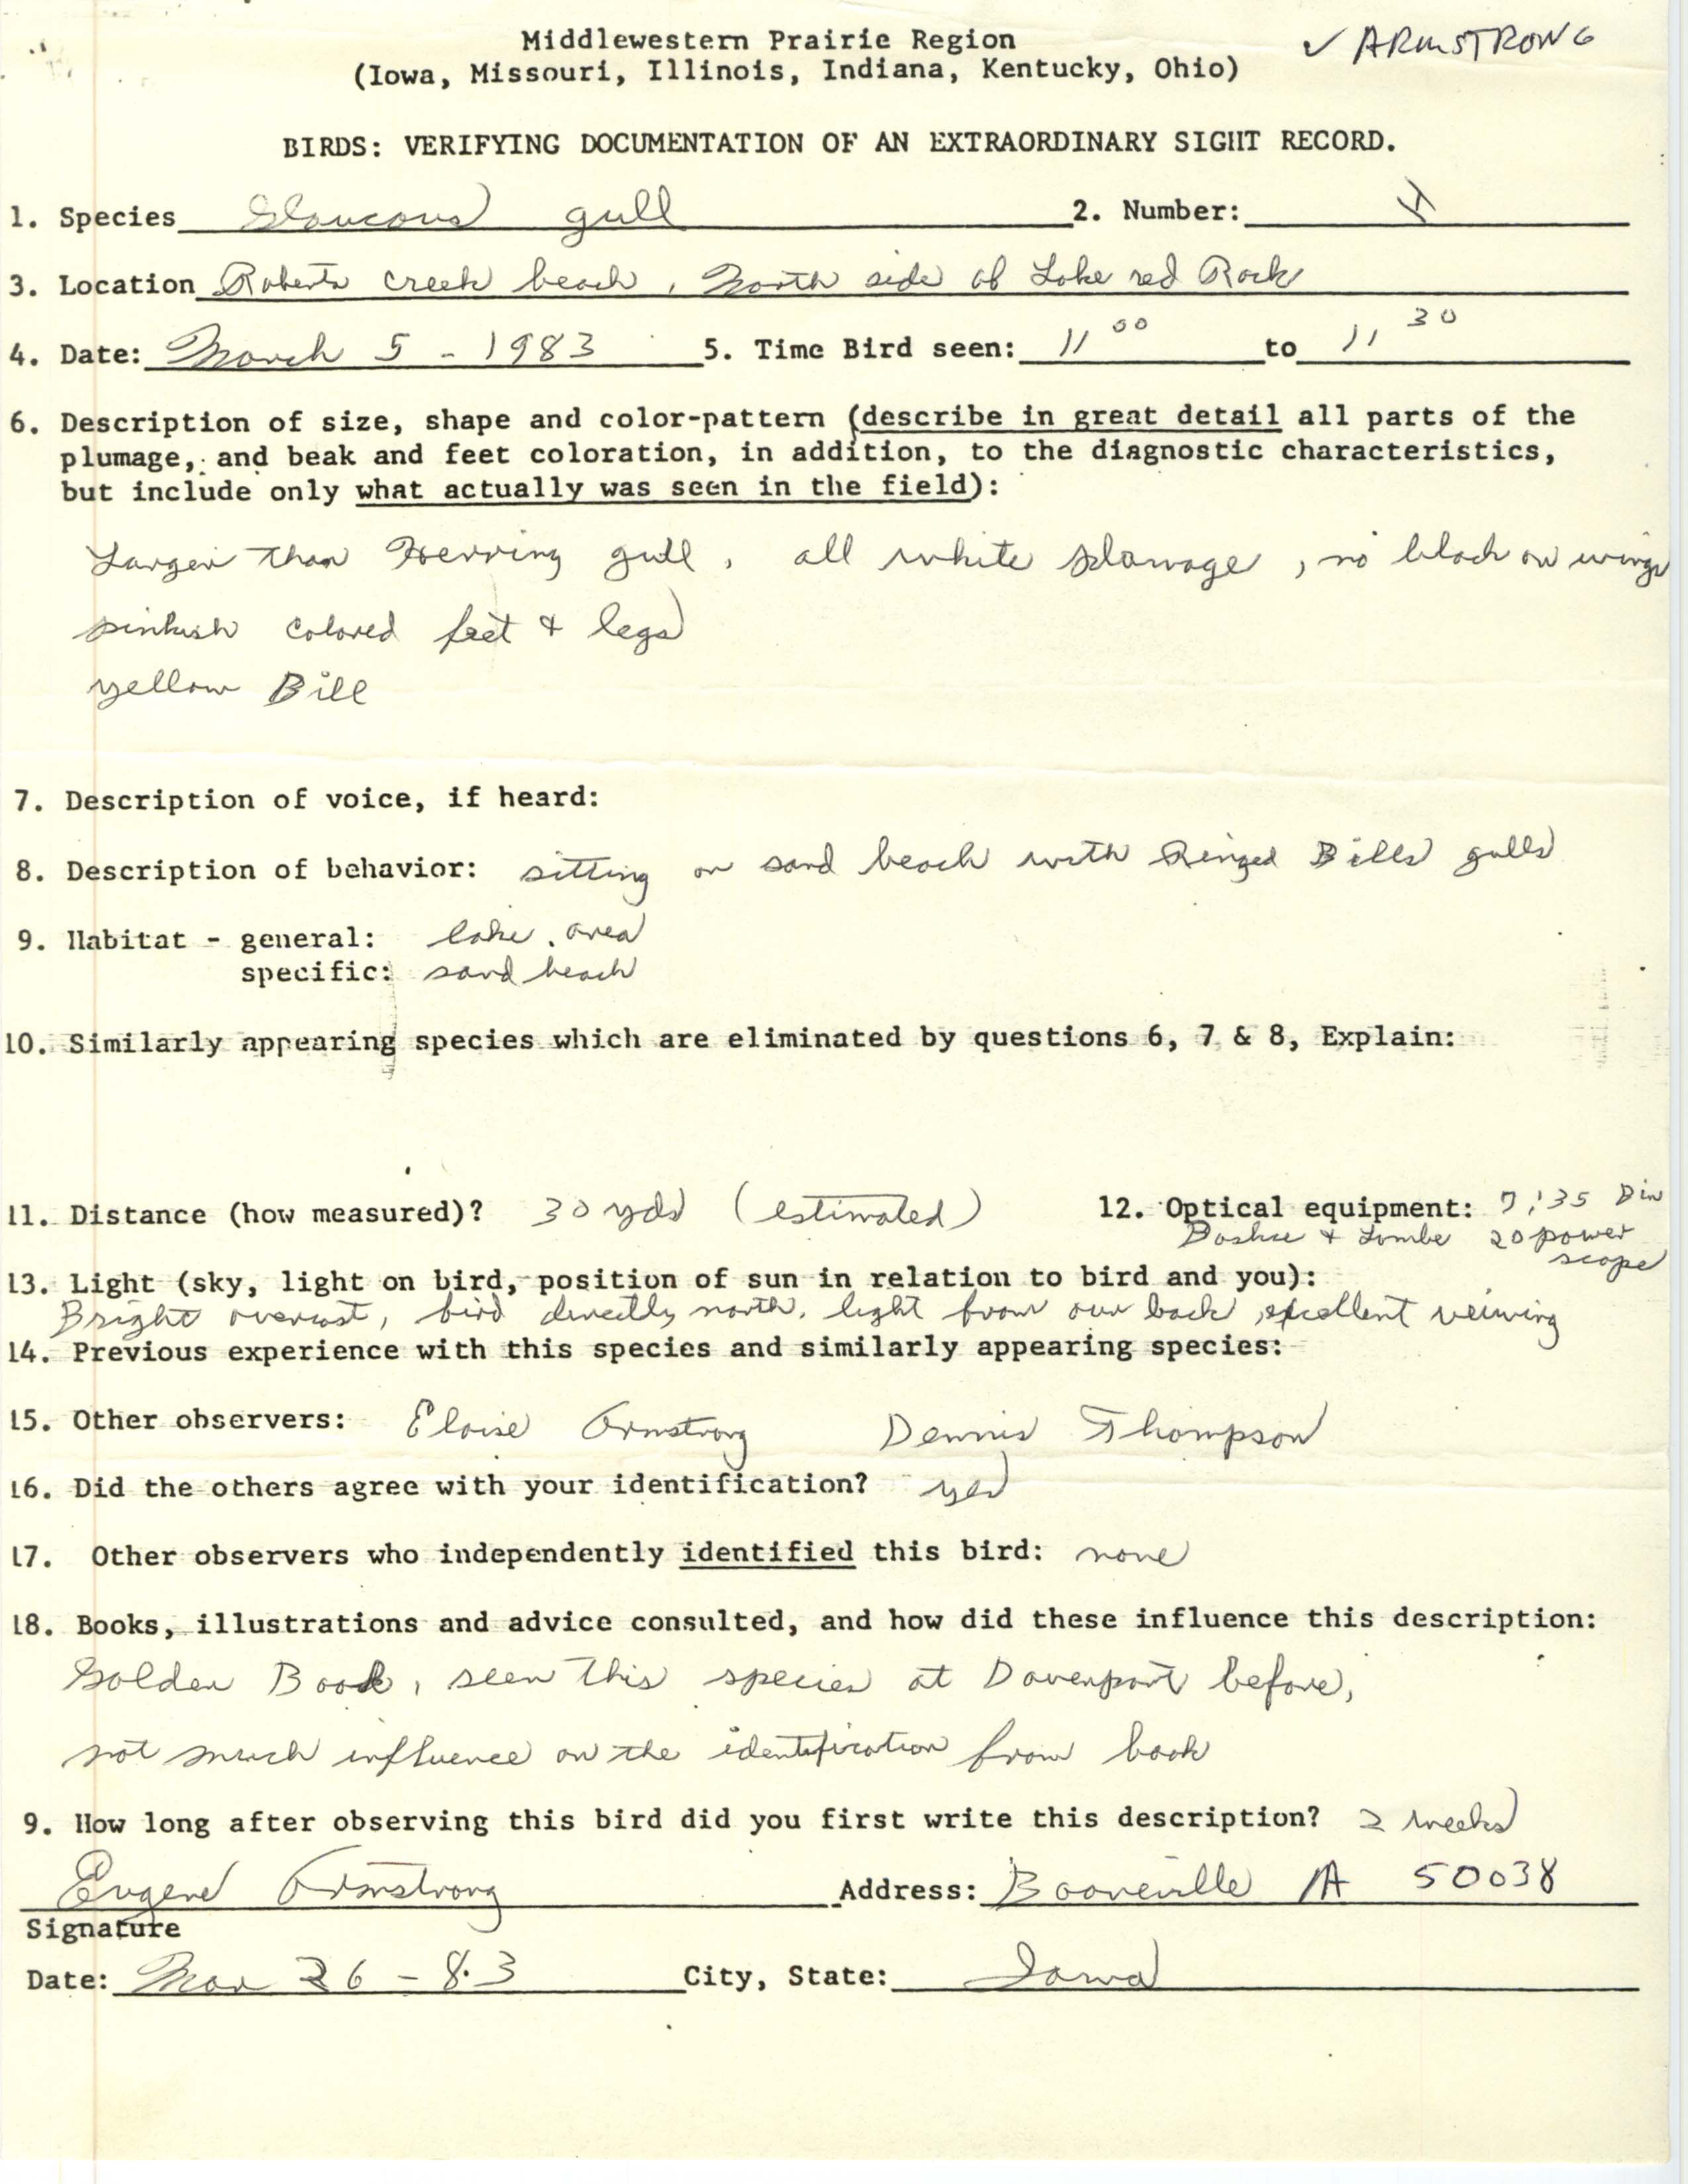 Rare bird documentation form for Glaucous Gull at Roberts Creek Beach at Lake Red Rock, 1983